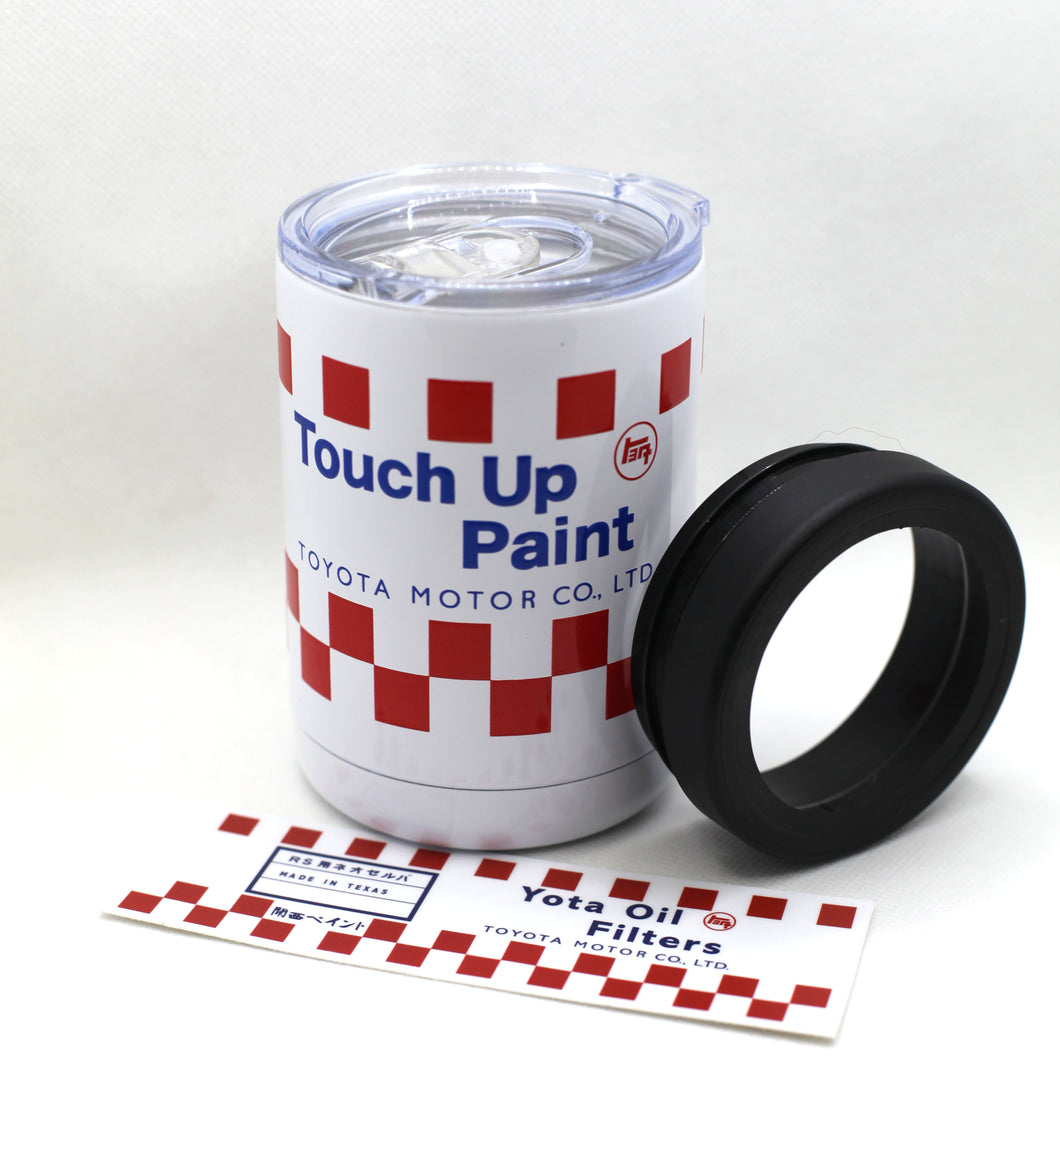 Touch Up Paint Tumbler & Insulator